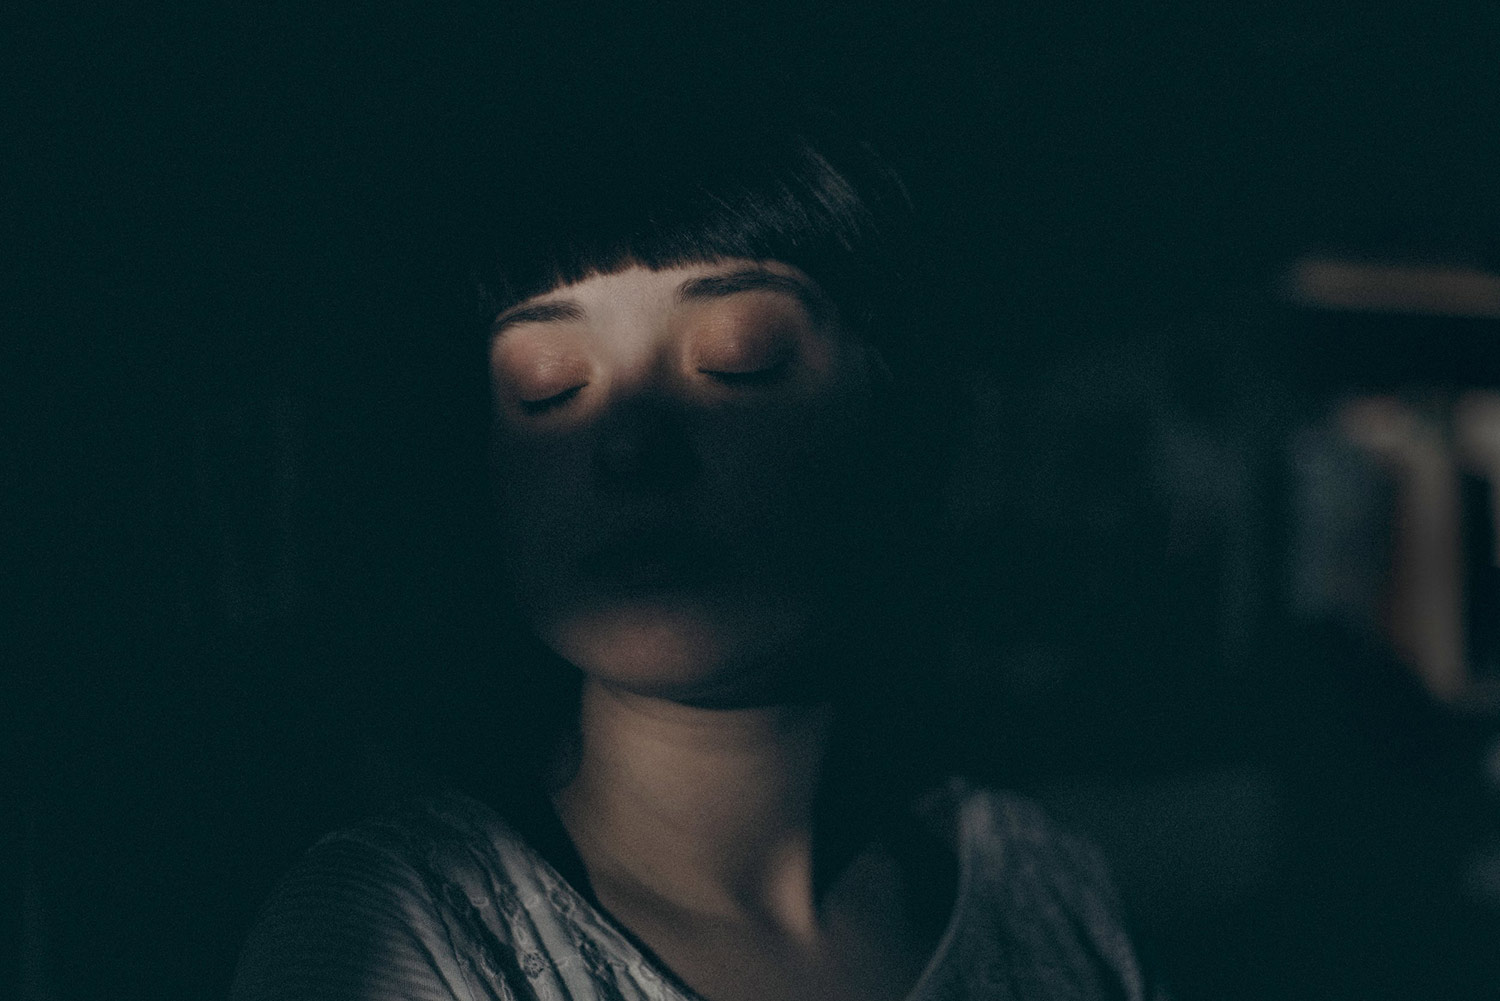 A woman's face with heavy shadows obscuring it